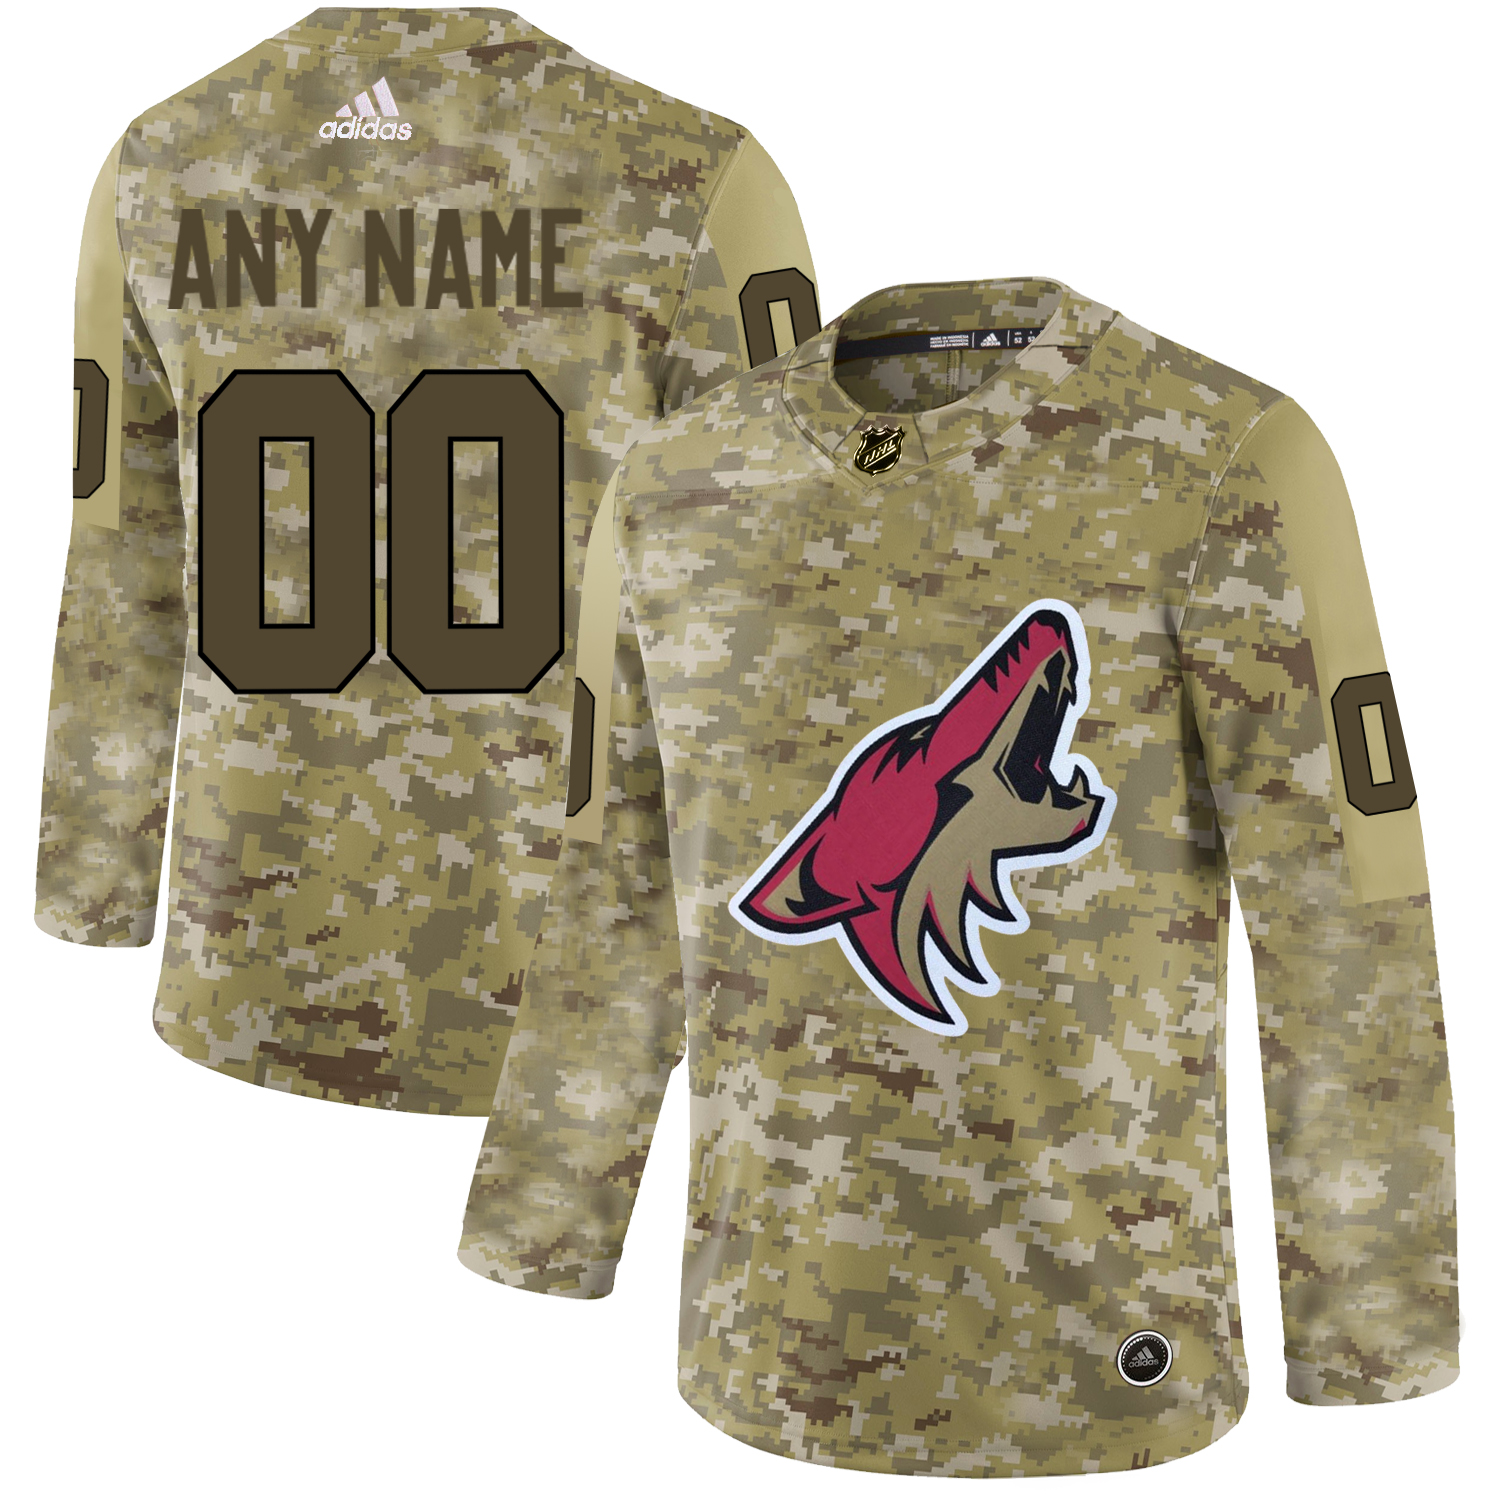 Men's Adidas Coyotes Personalized Camo Authentic NHL Jersey